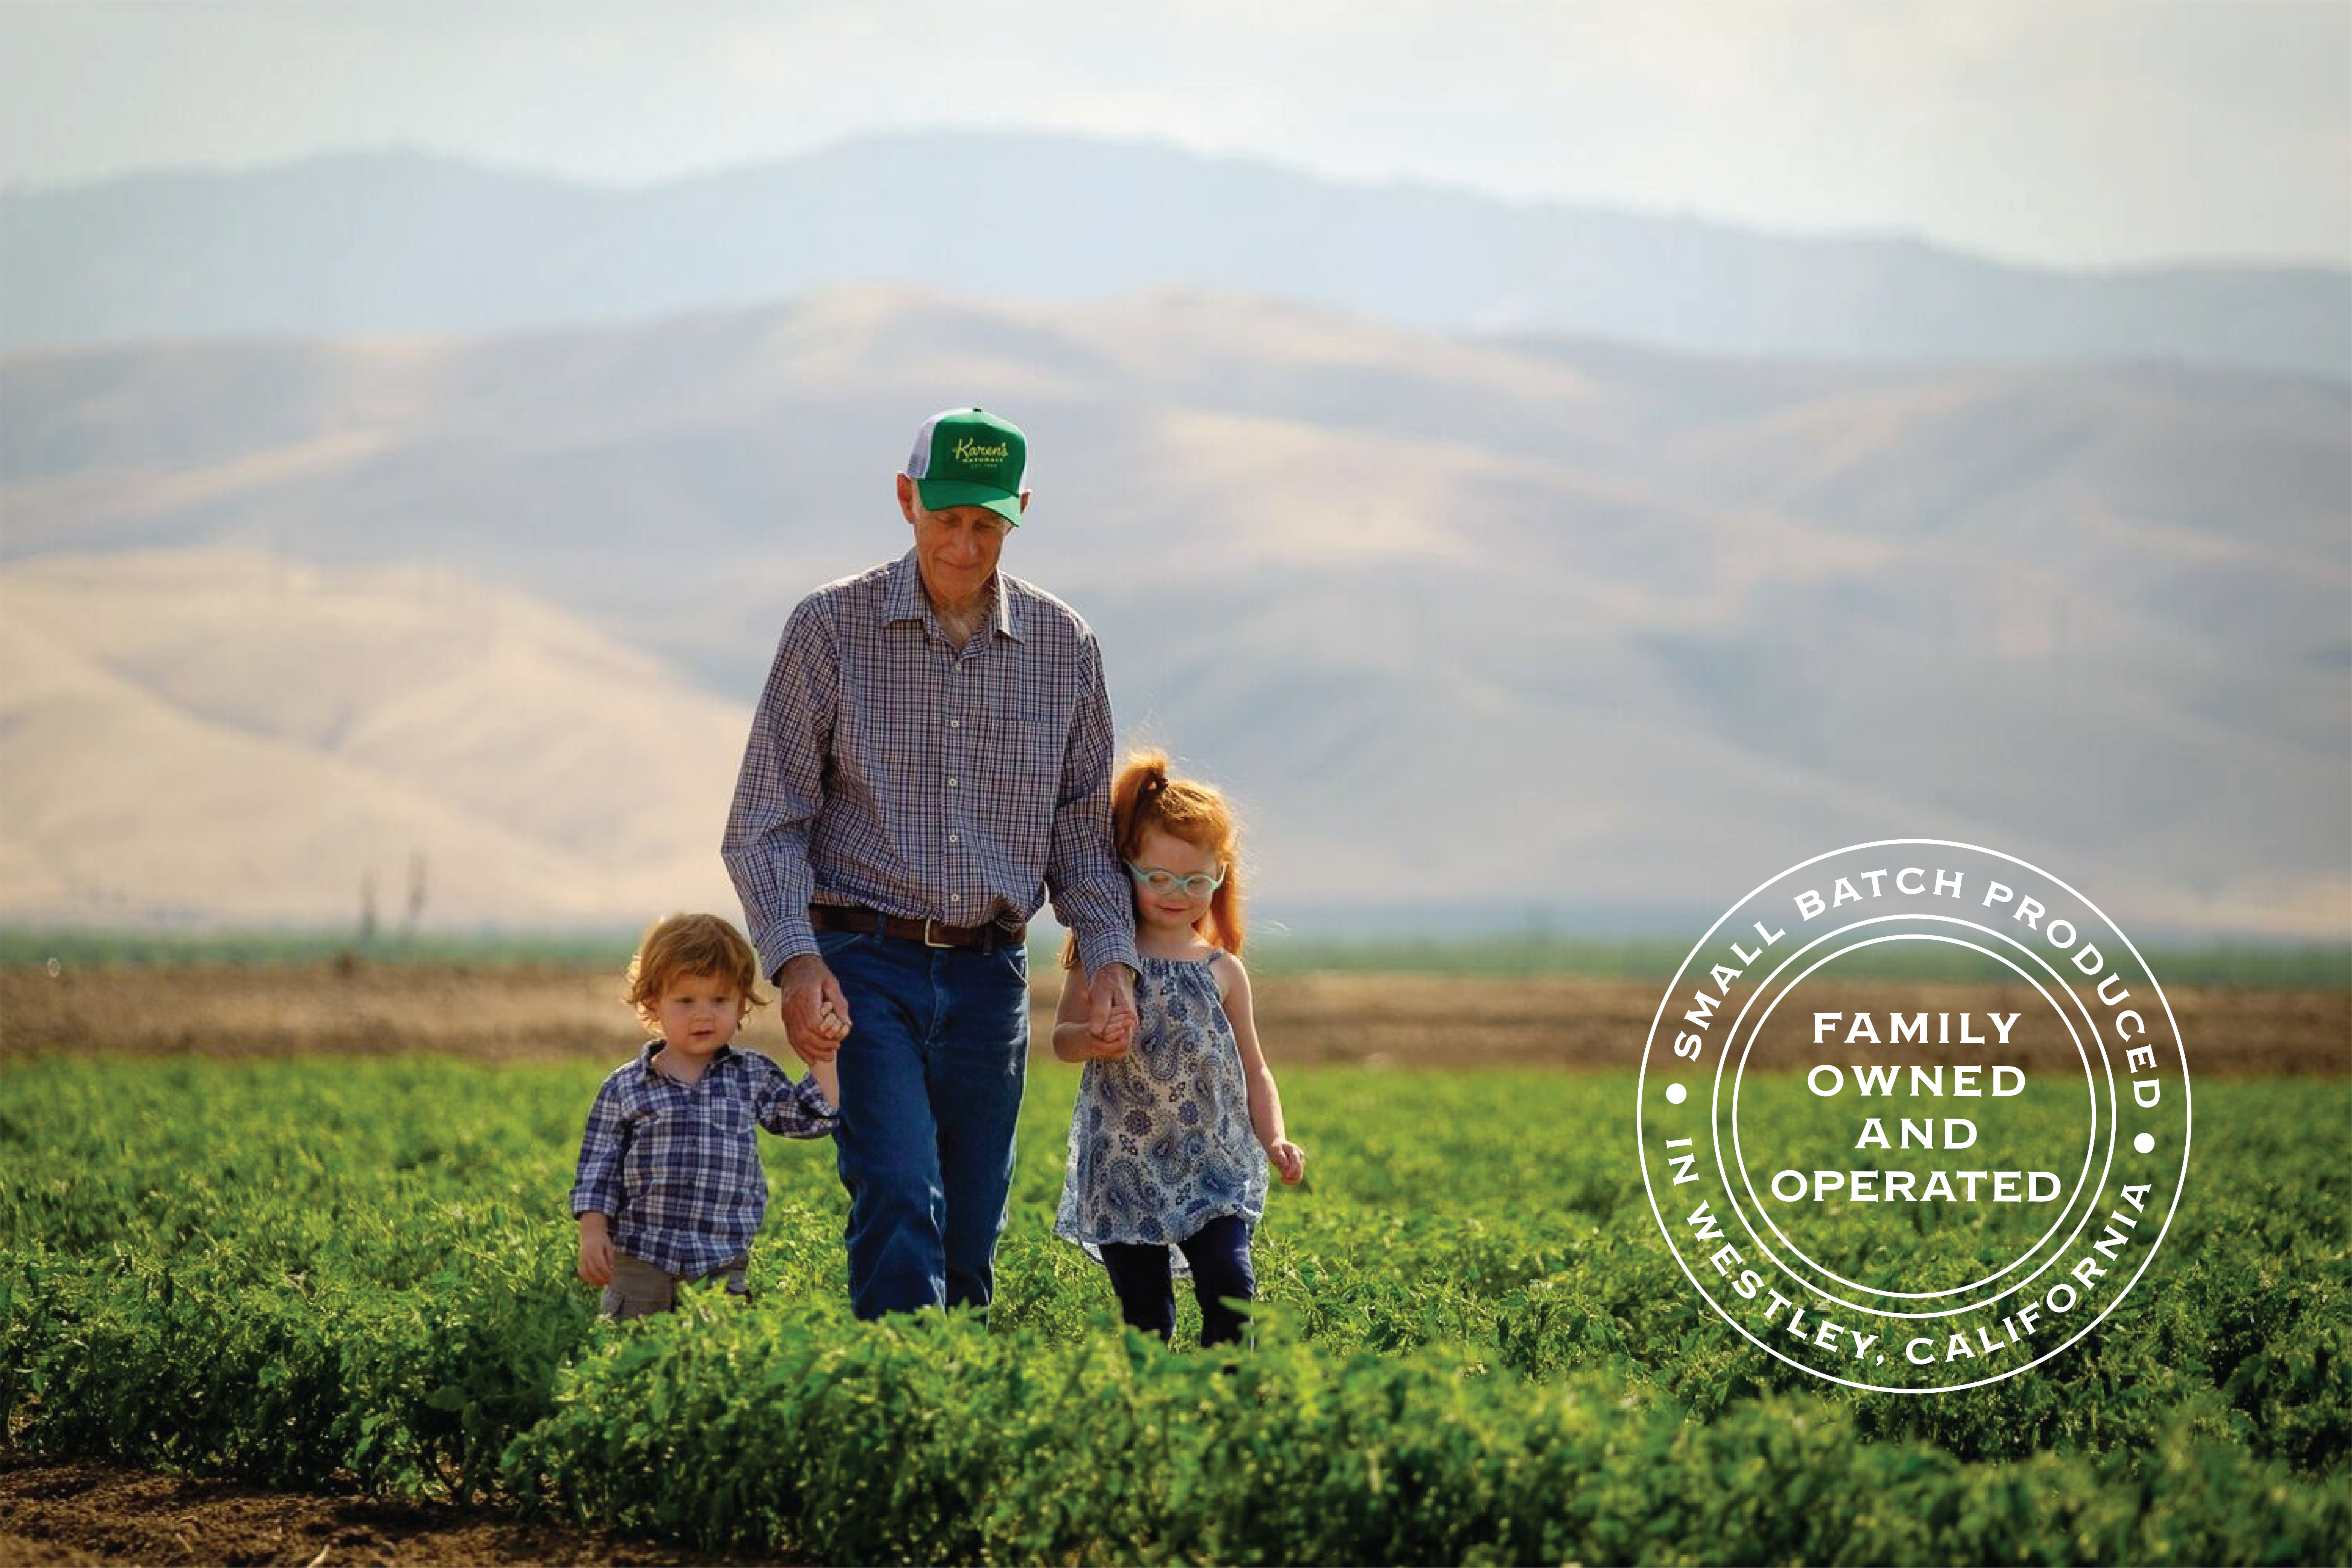 Farmer Bill, the patriarch of Karen's Natuals, with his grandkids walking in the field or crops. 